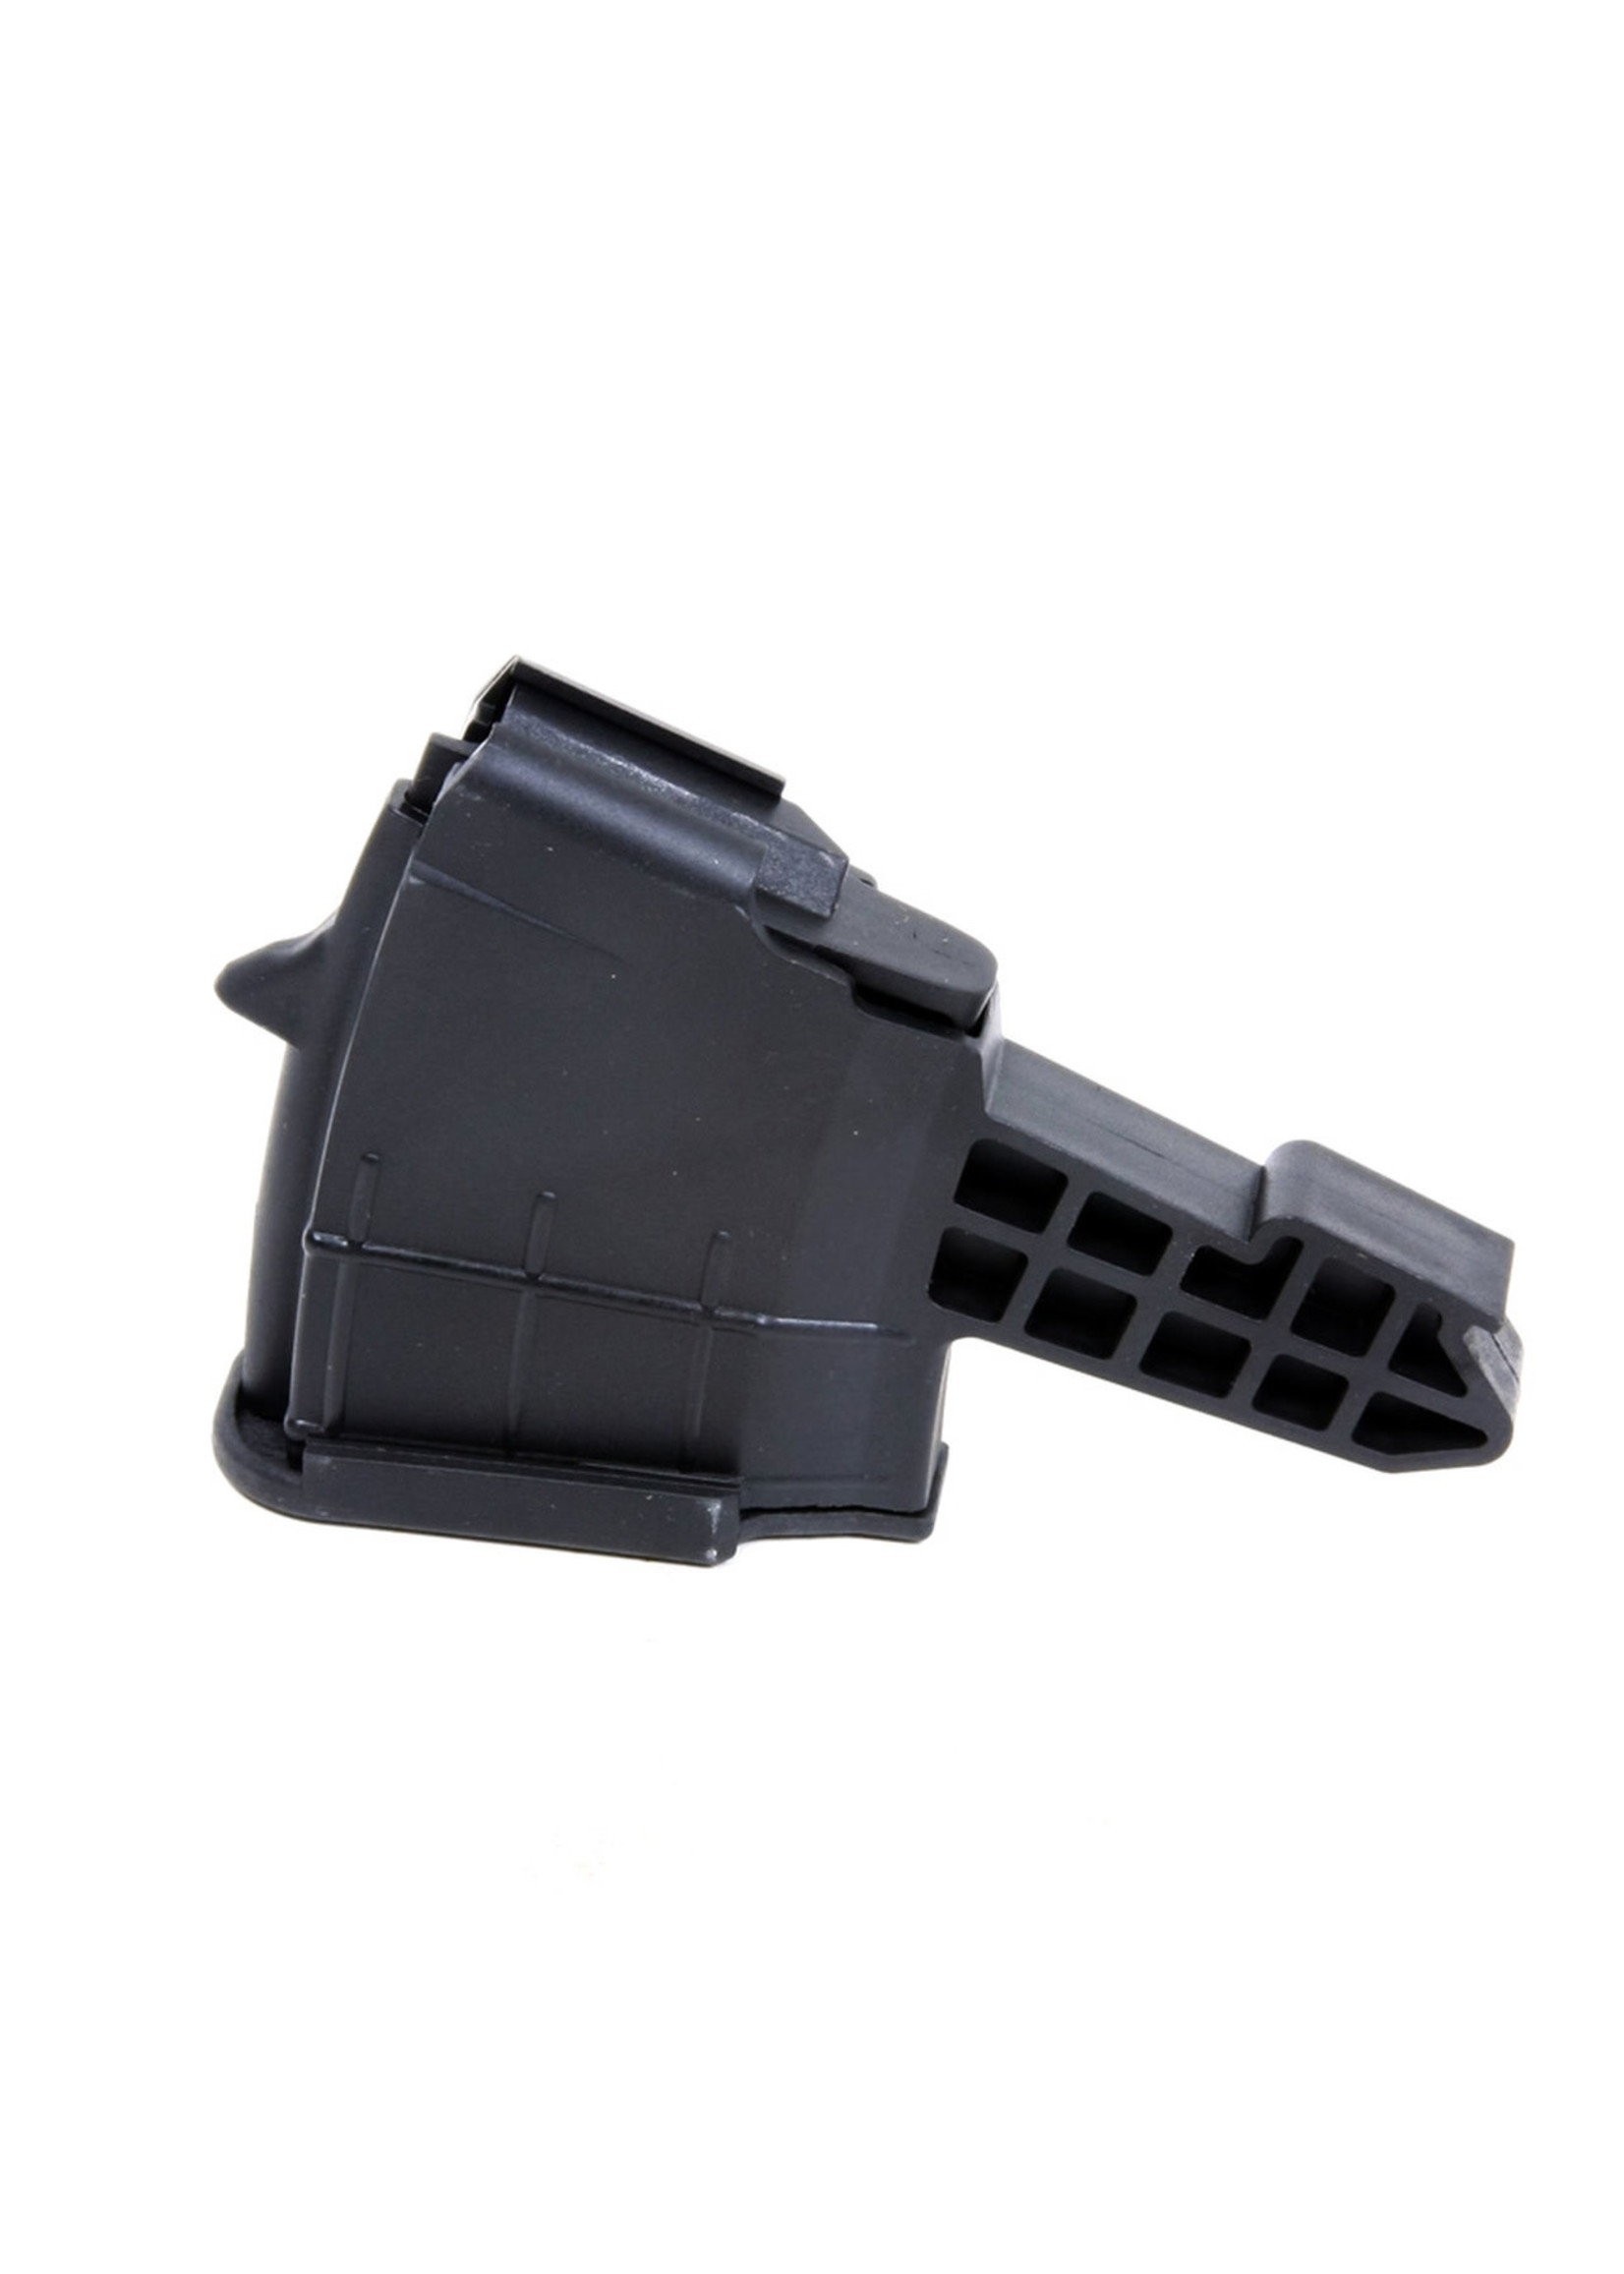 Pro-Mag PRO MAG SKS 7.62X39 BLK 5RD POLY MAGAZINE